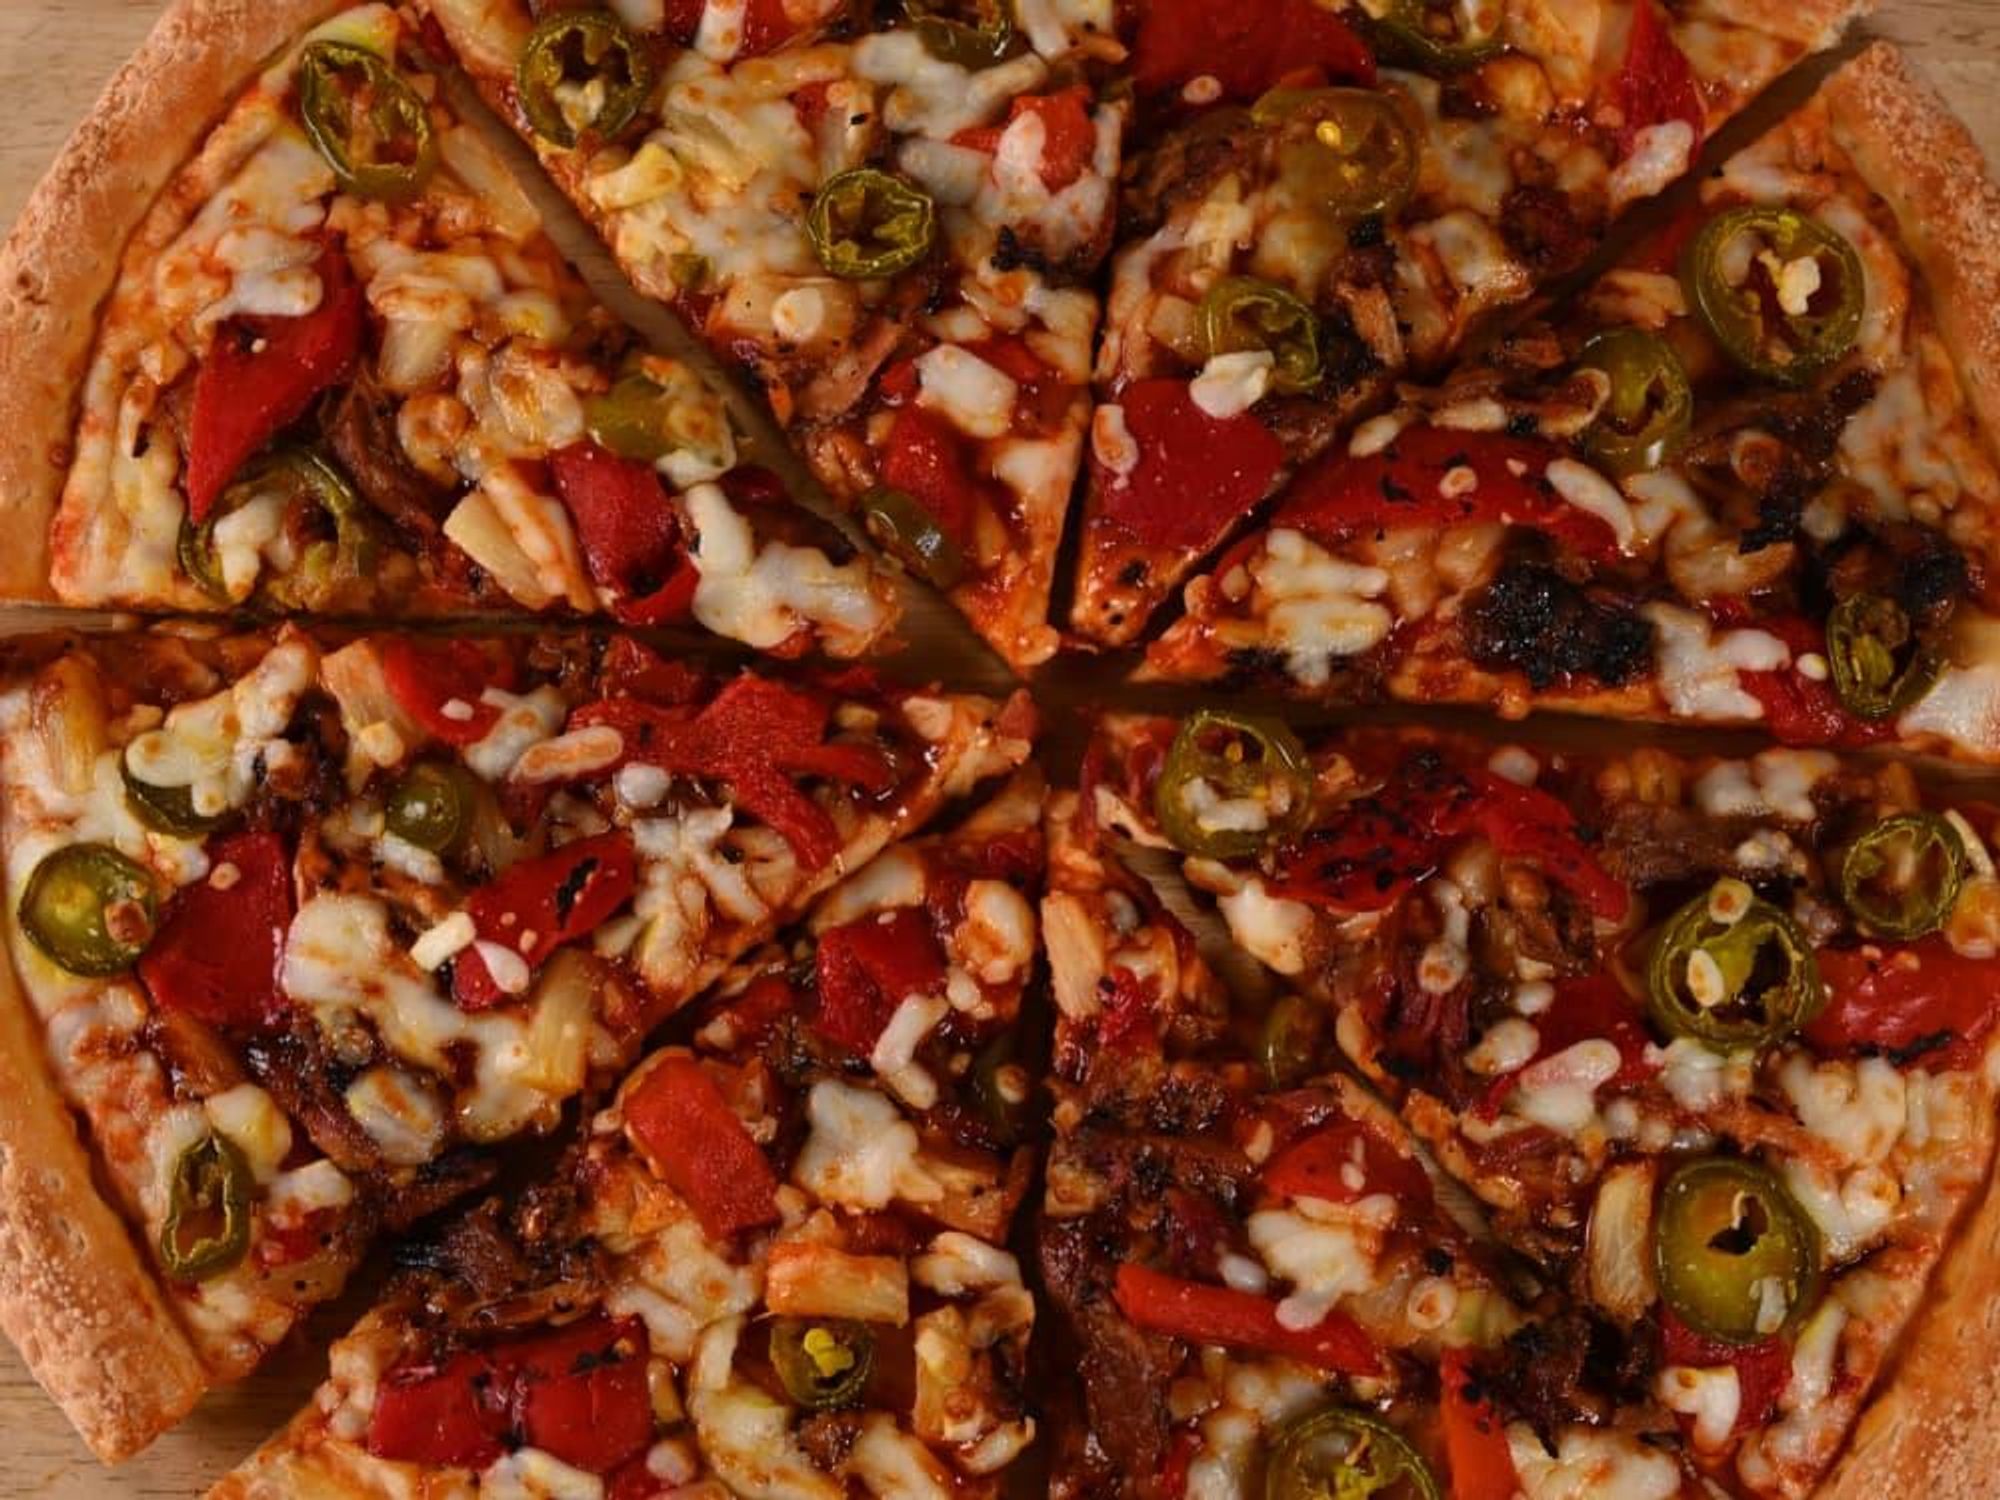 Papa Johns Introduces New York-Style Pizza with Hand-Stretched